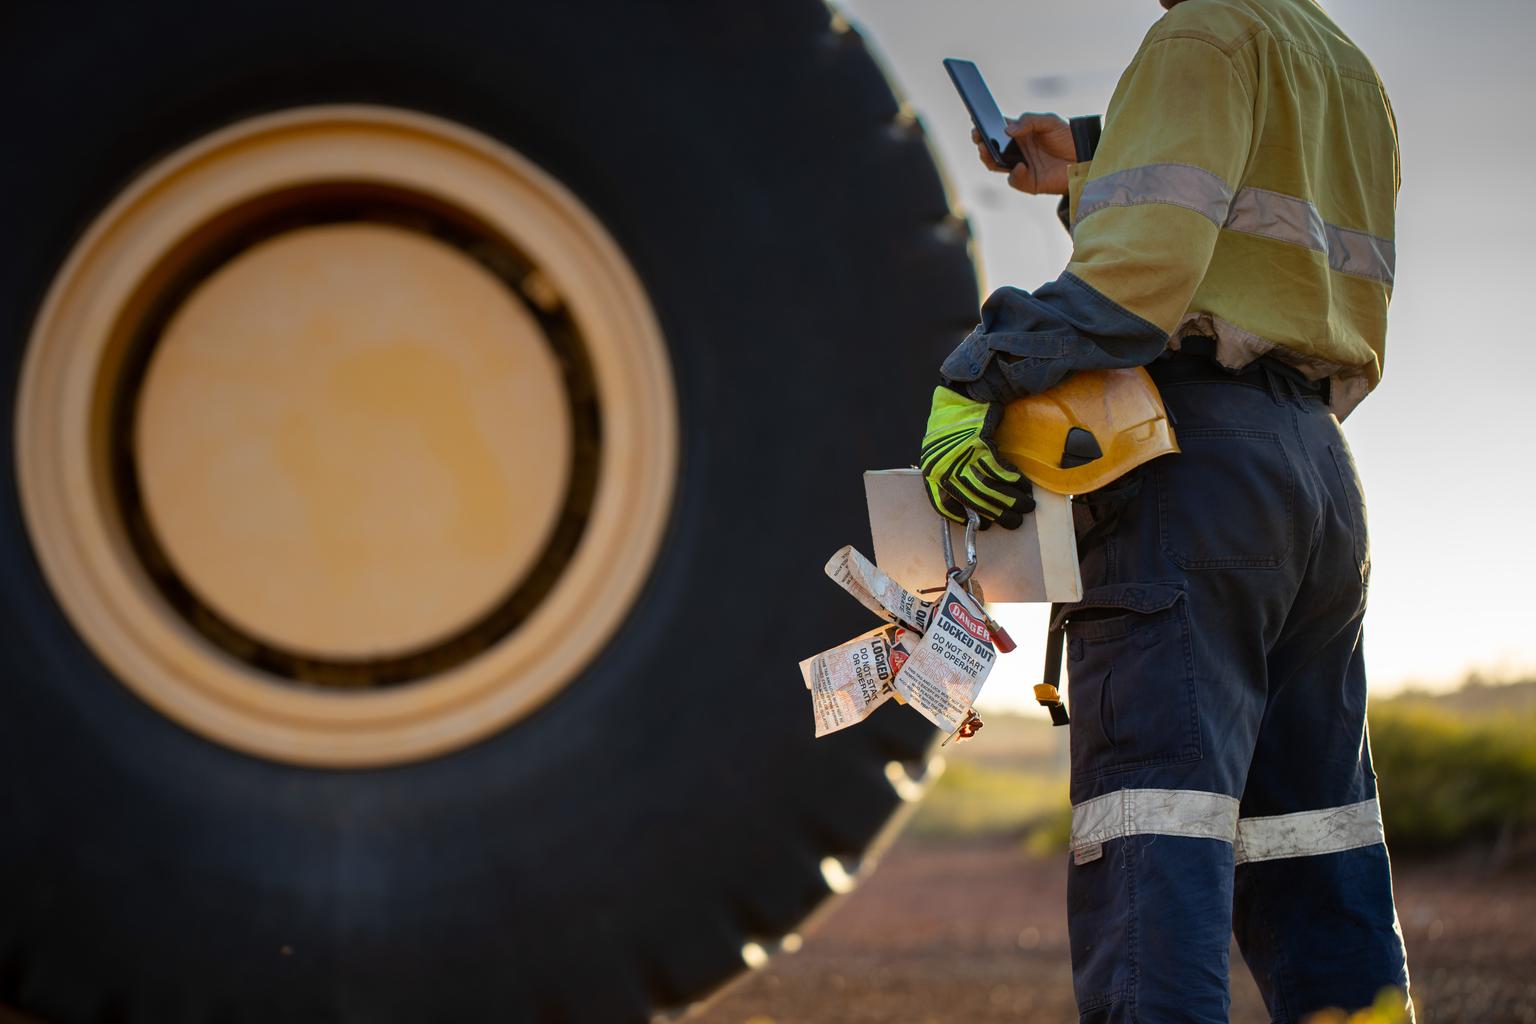 Haul truck inspector wearing work uniform safety glove holding hard hat danger tags personal locks inspection pre operation book inspecting taking pic with cell phone defocused haul truck background